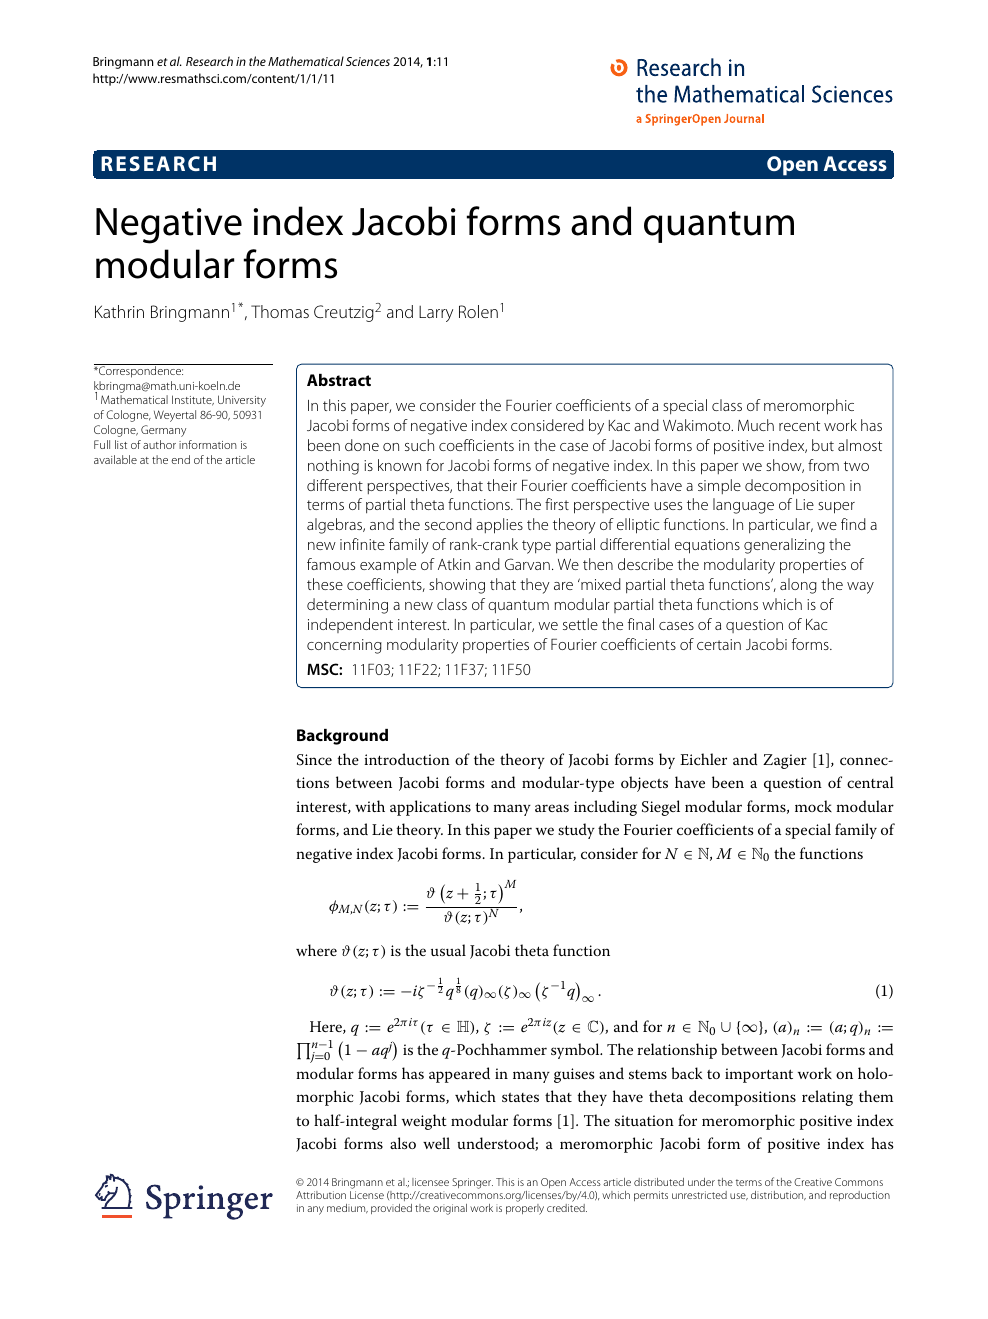 Negative Index Jacobi Forms And Quantum Modular Forms Topic Of Research Paper In Mathematics Download Scholarly Article Pdf And Read For Free On Cyberleninka Open Science Hub